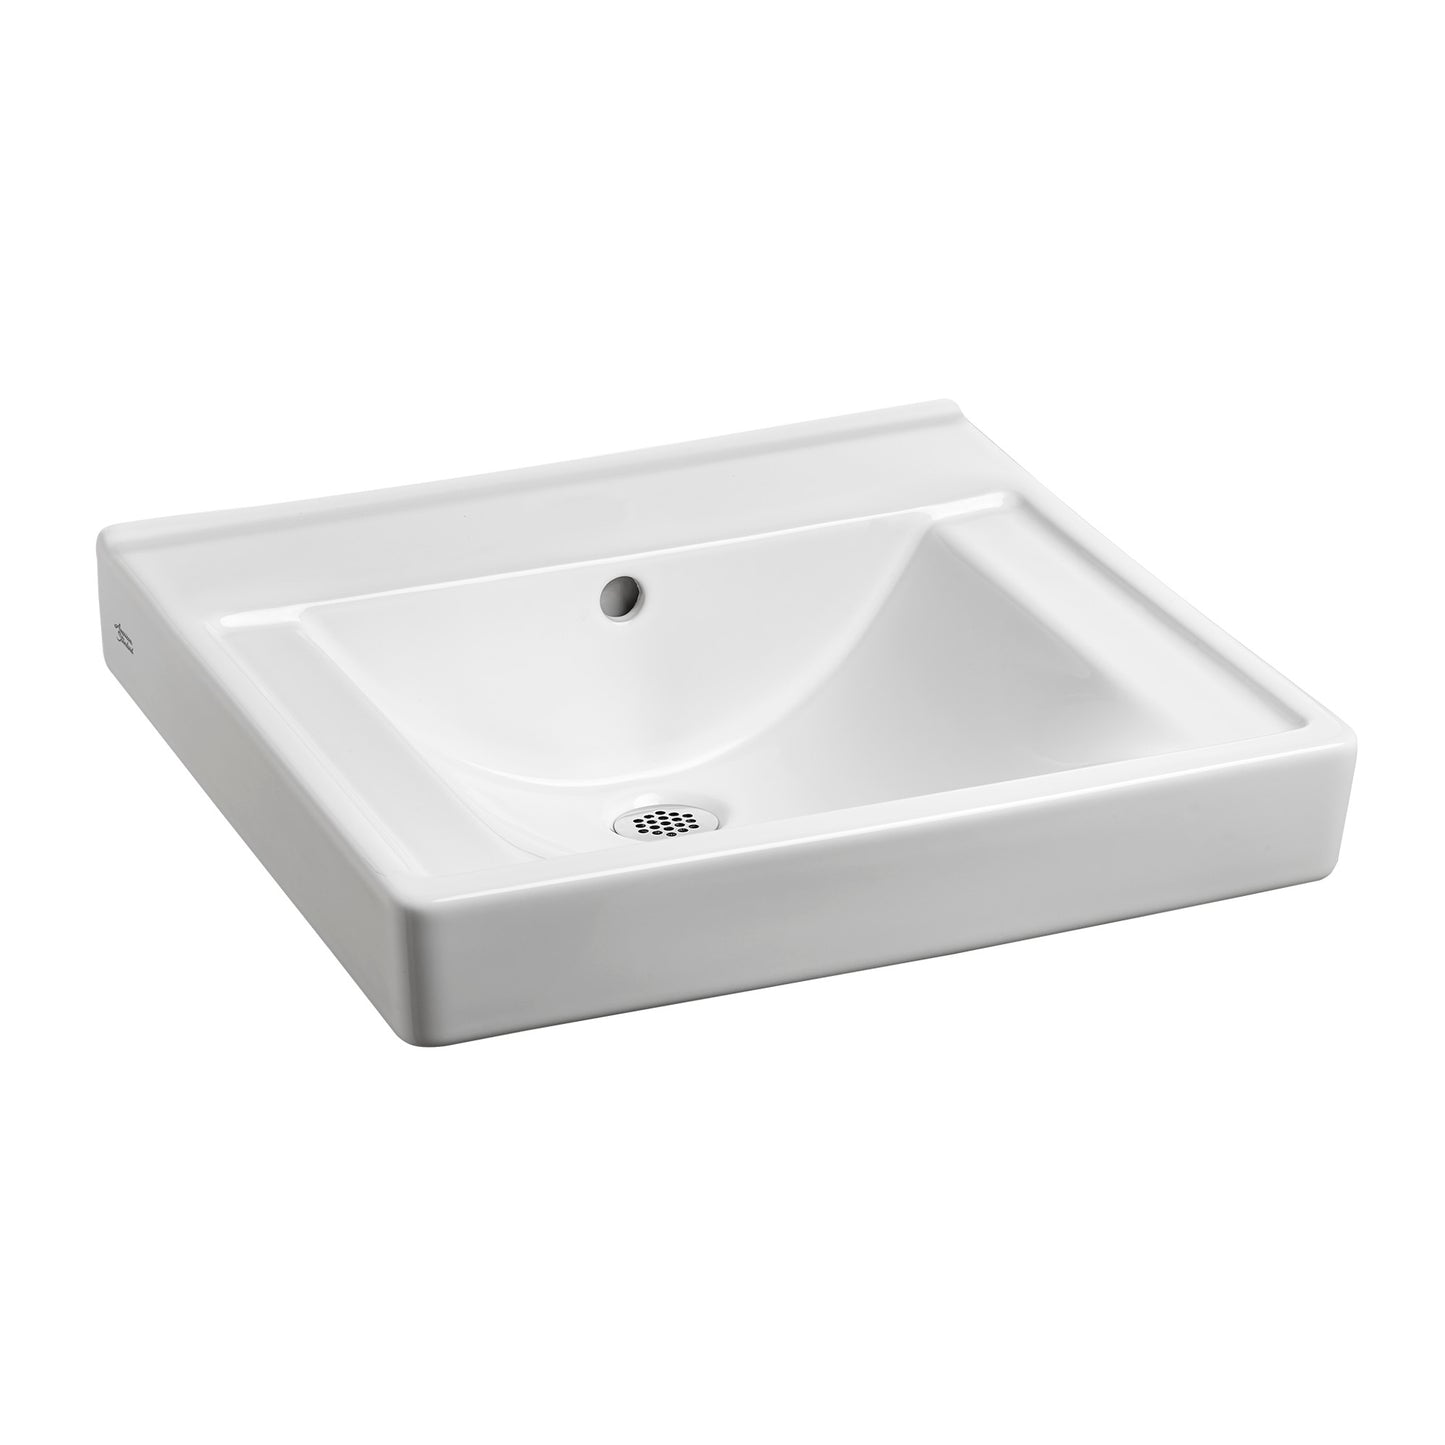 AMERICAN-STANDARD 9024000EC.020, Decorum Wall-Hung EverClean Sink, No Faucet Holes in White